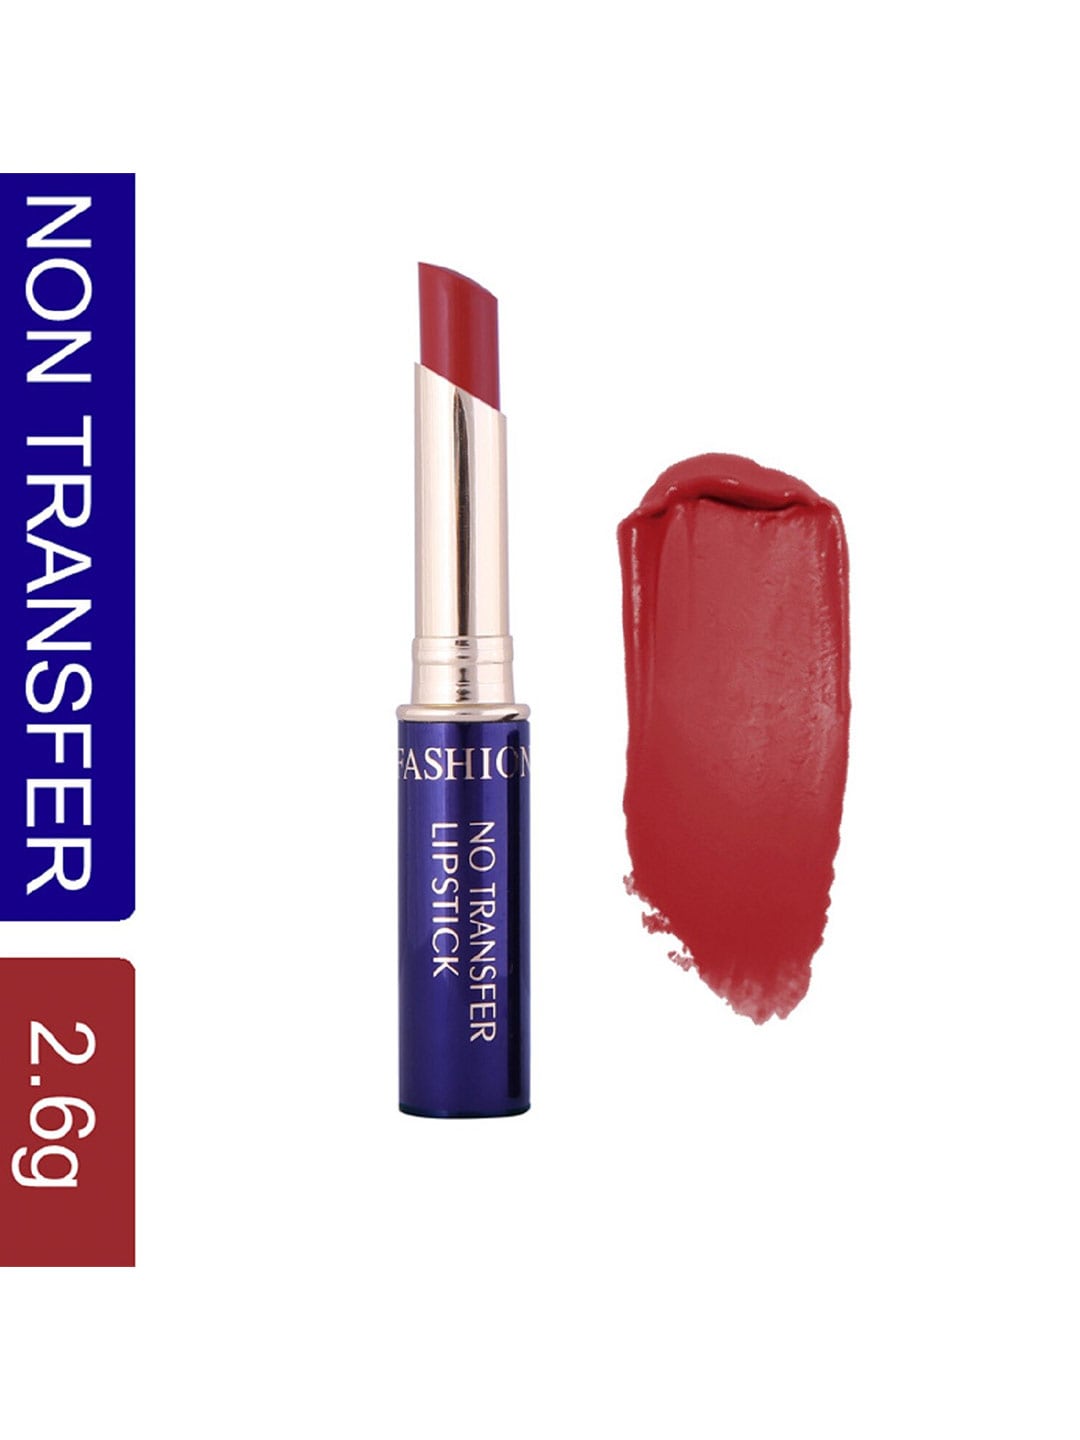 Fashion Colour No Transfer Matte Waterproof Lipstick 2.6 g - Rouge Red 31 Price in India